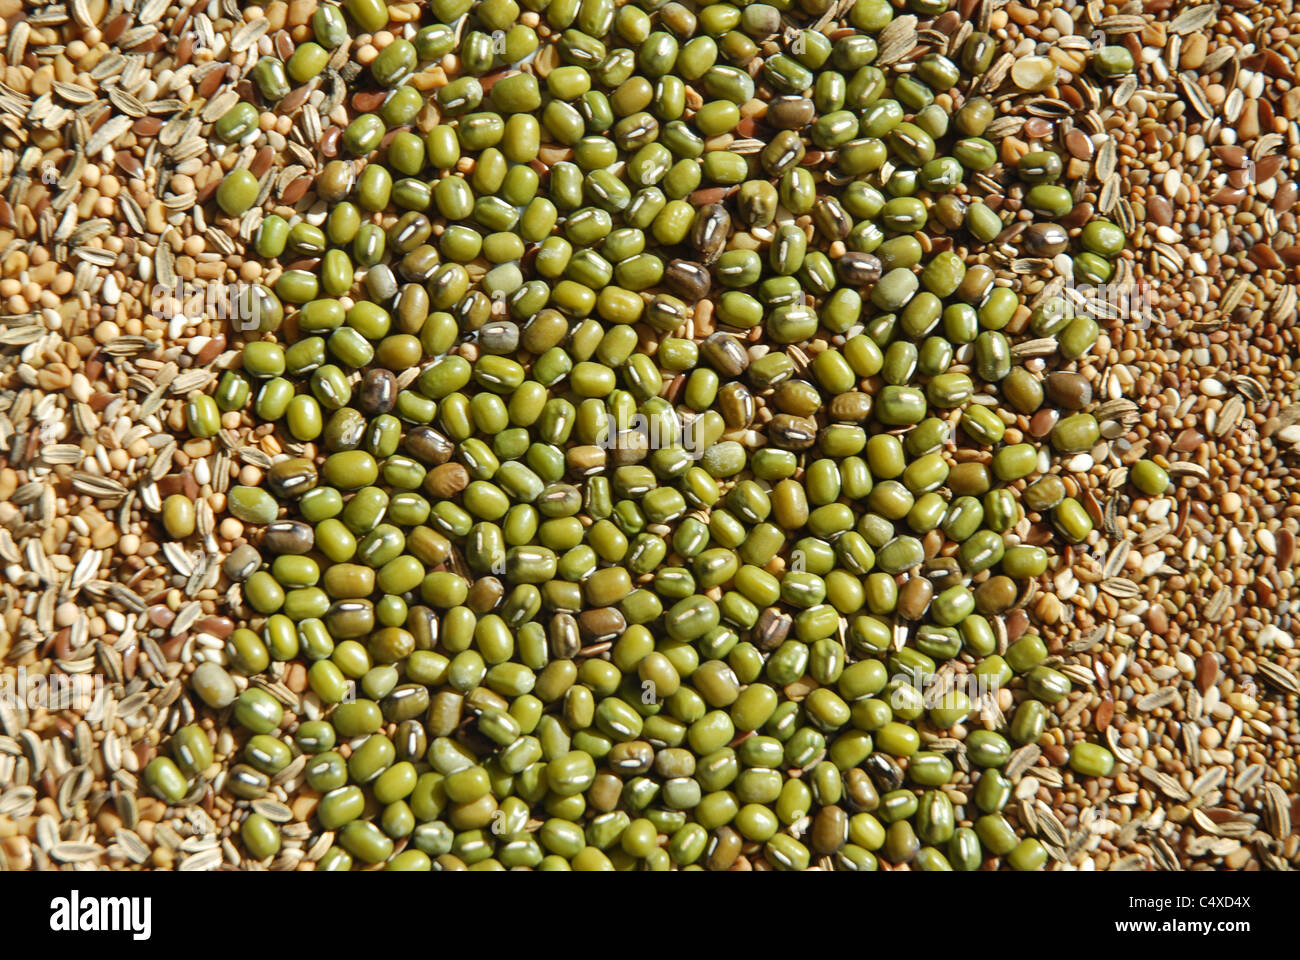 selection of seeds, salad sprouts including mung beans, mixed Stock Photo